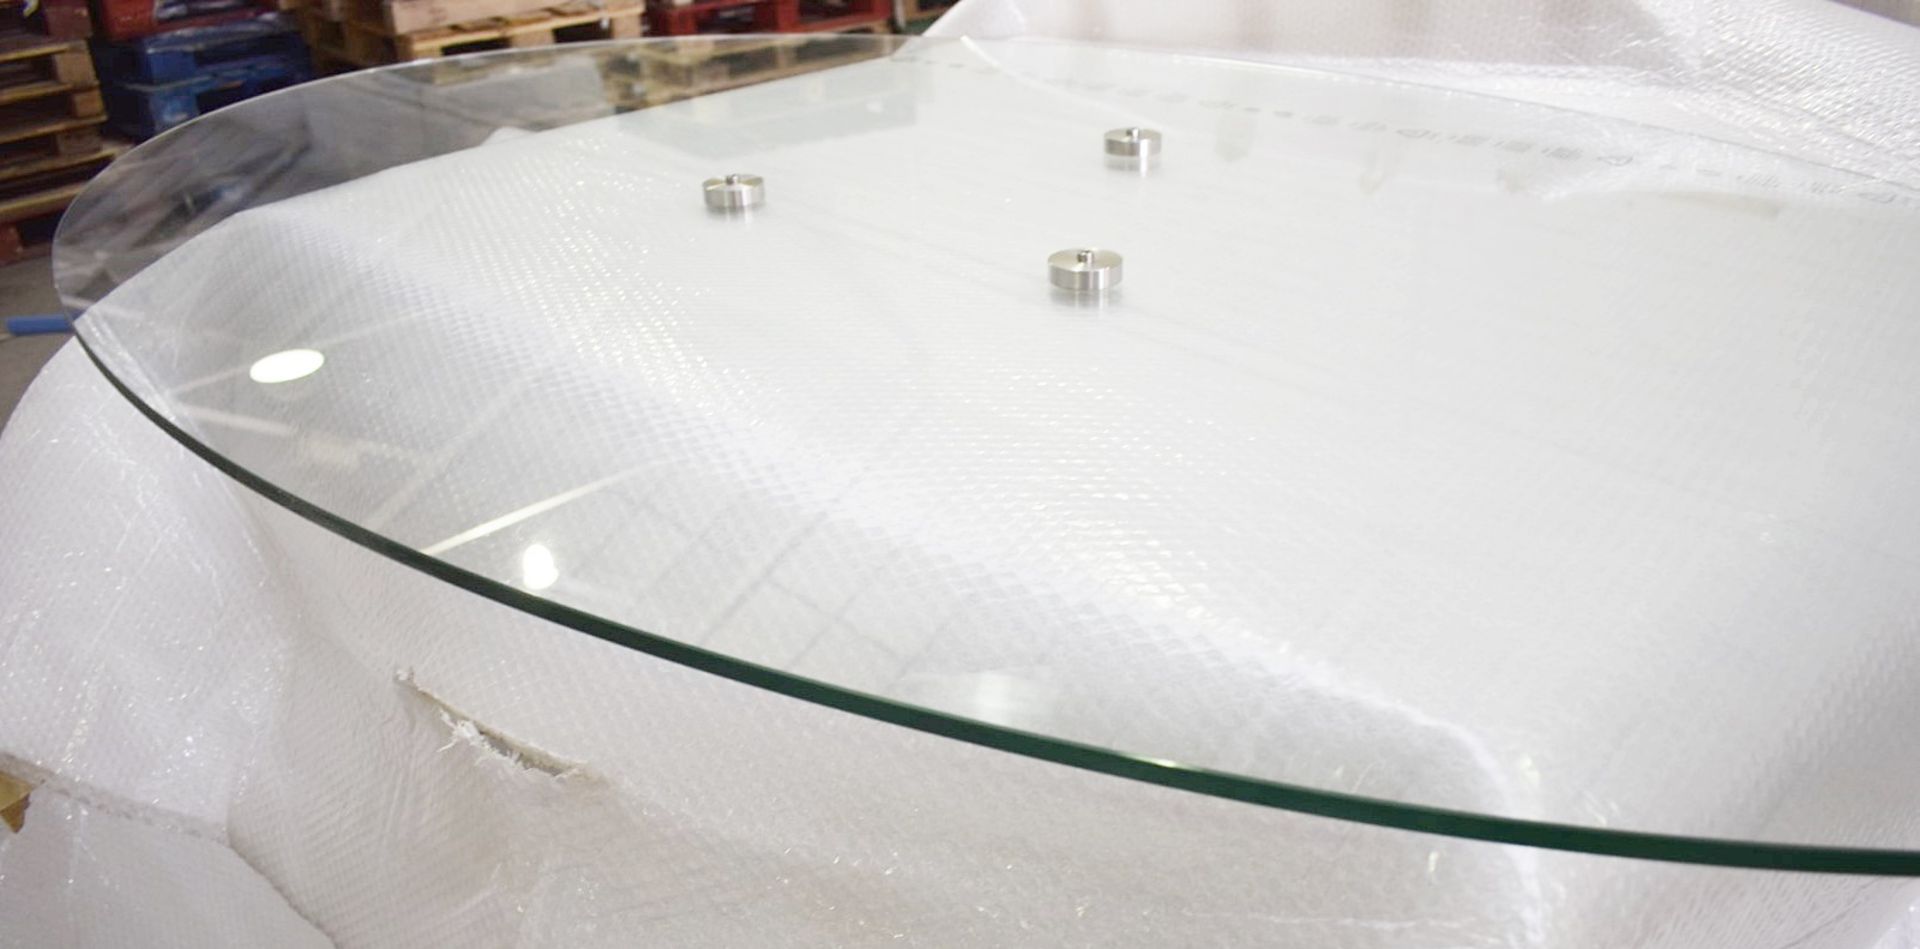 1 x PORADA 'Infinity' Oval 12mm Thick Transparent Tempered Designer Glass Table Top (No Base) - Image 6 of 9